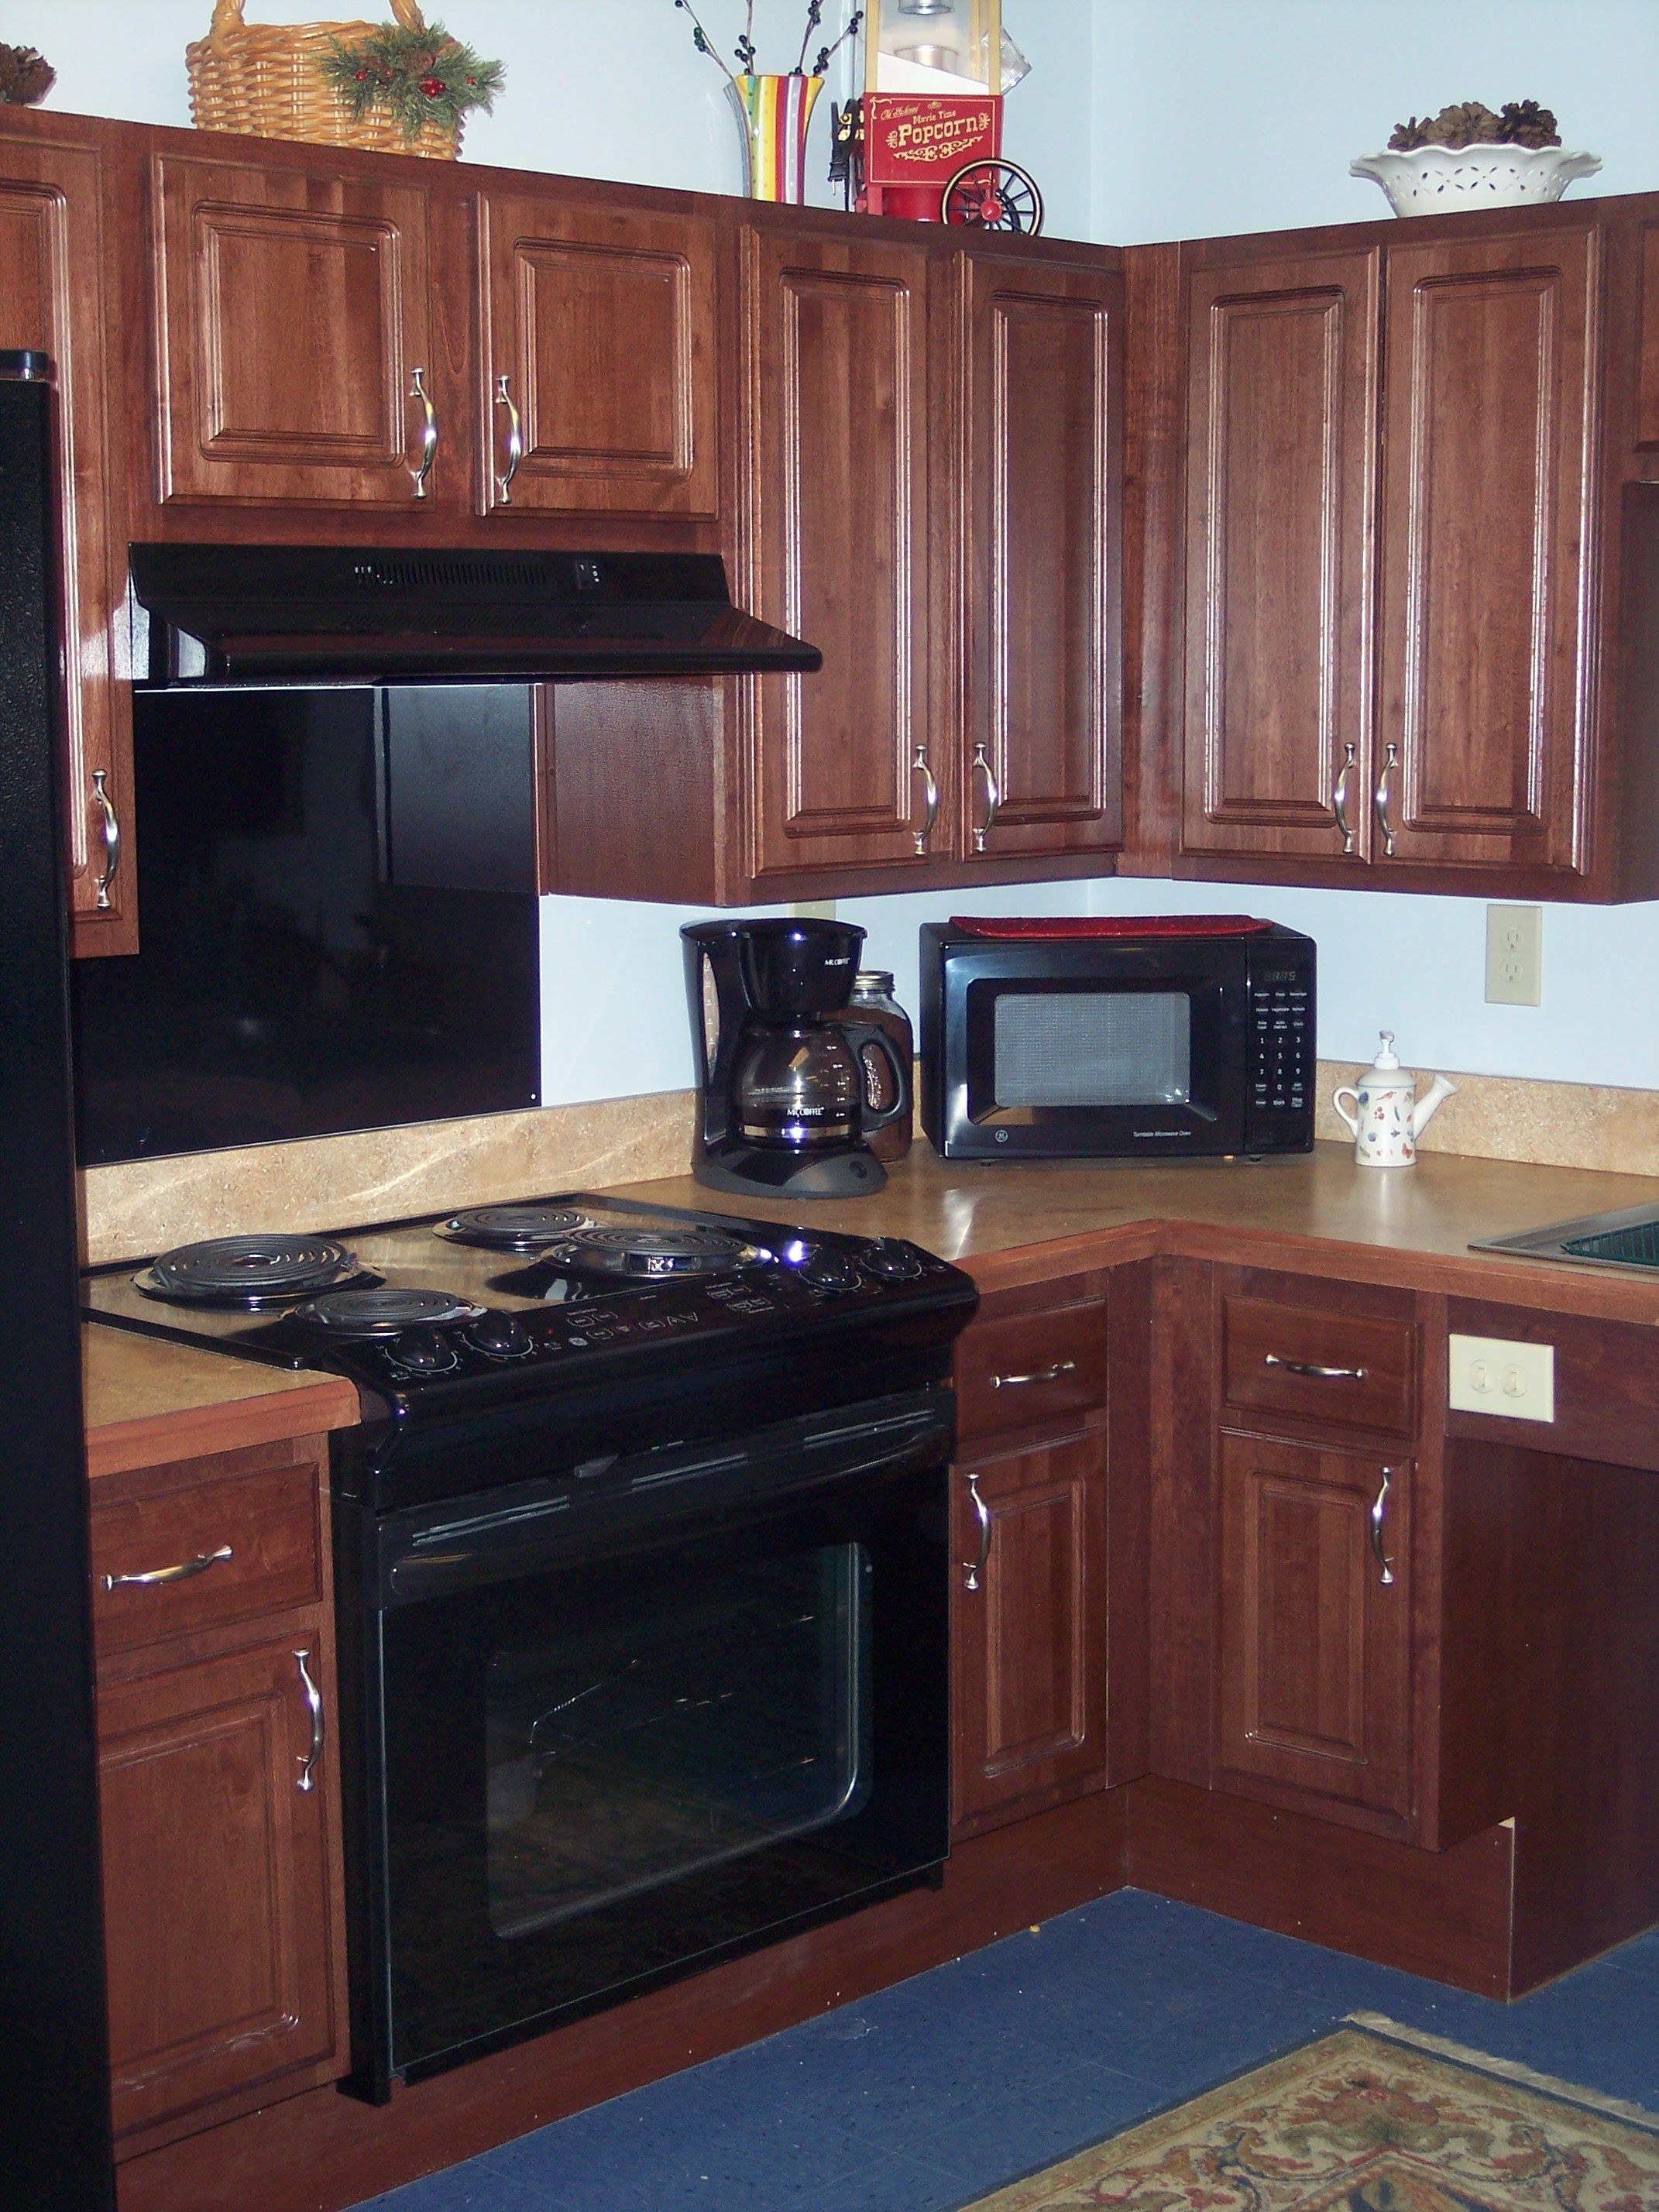 This is a photograph of an electric range which has an overhead light and exhaust fan.  